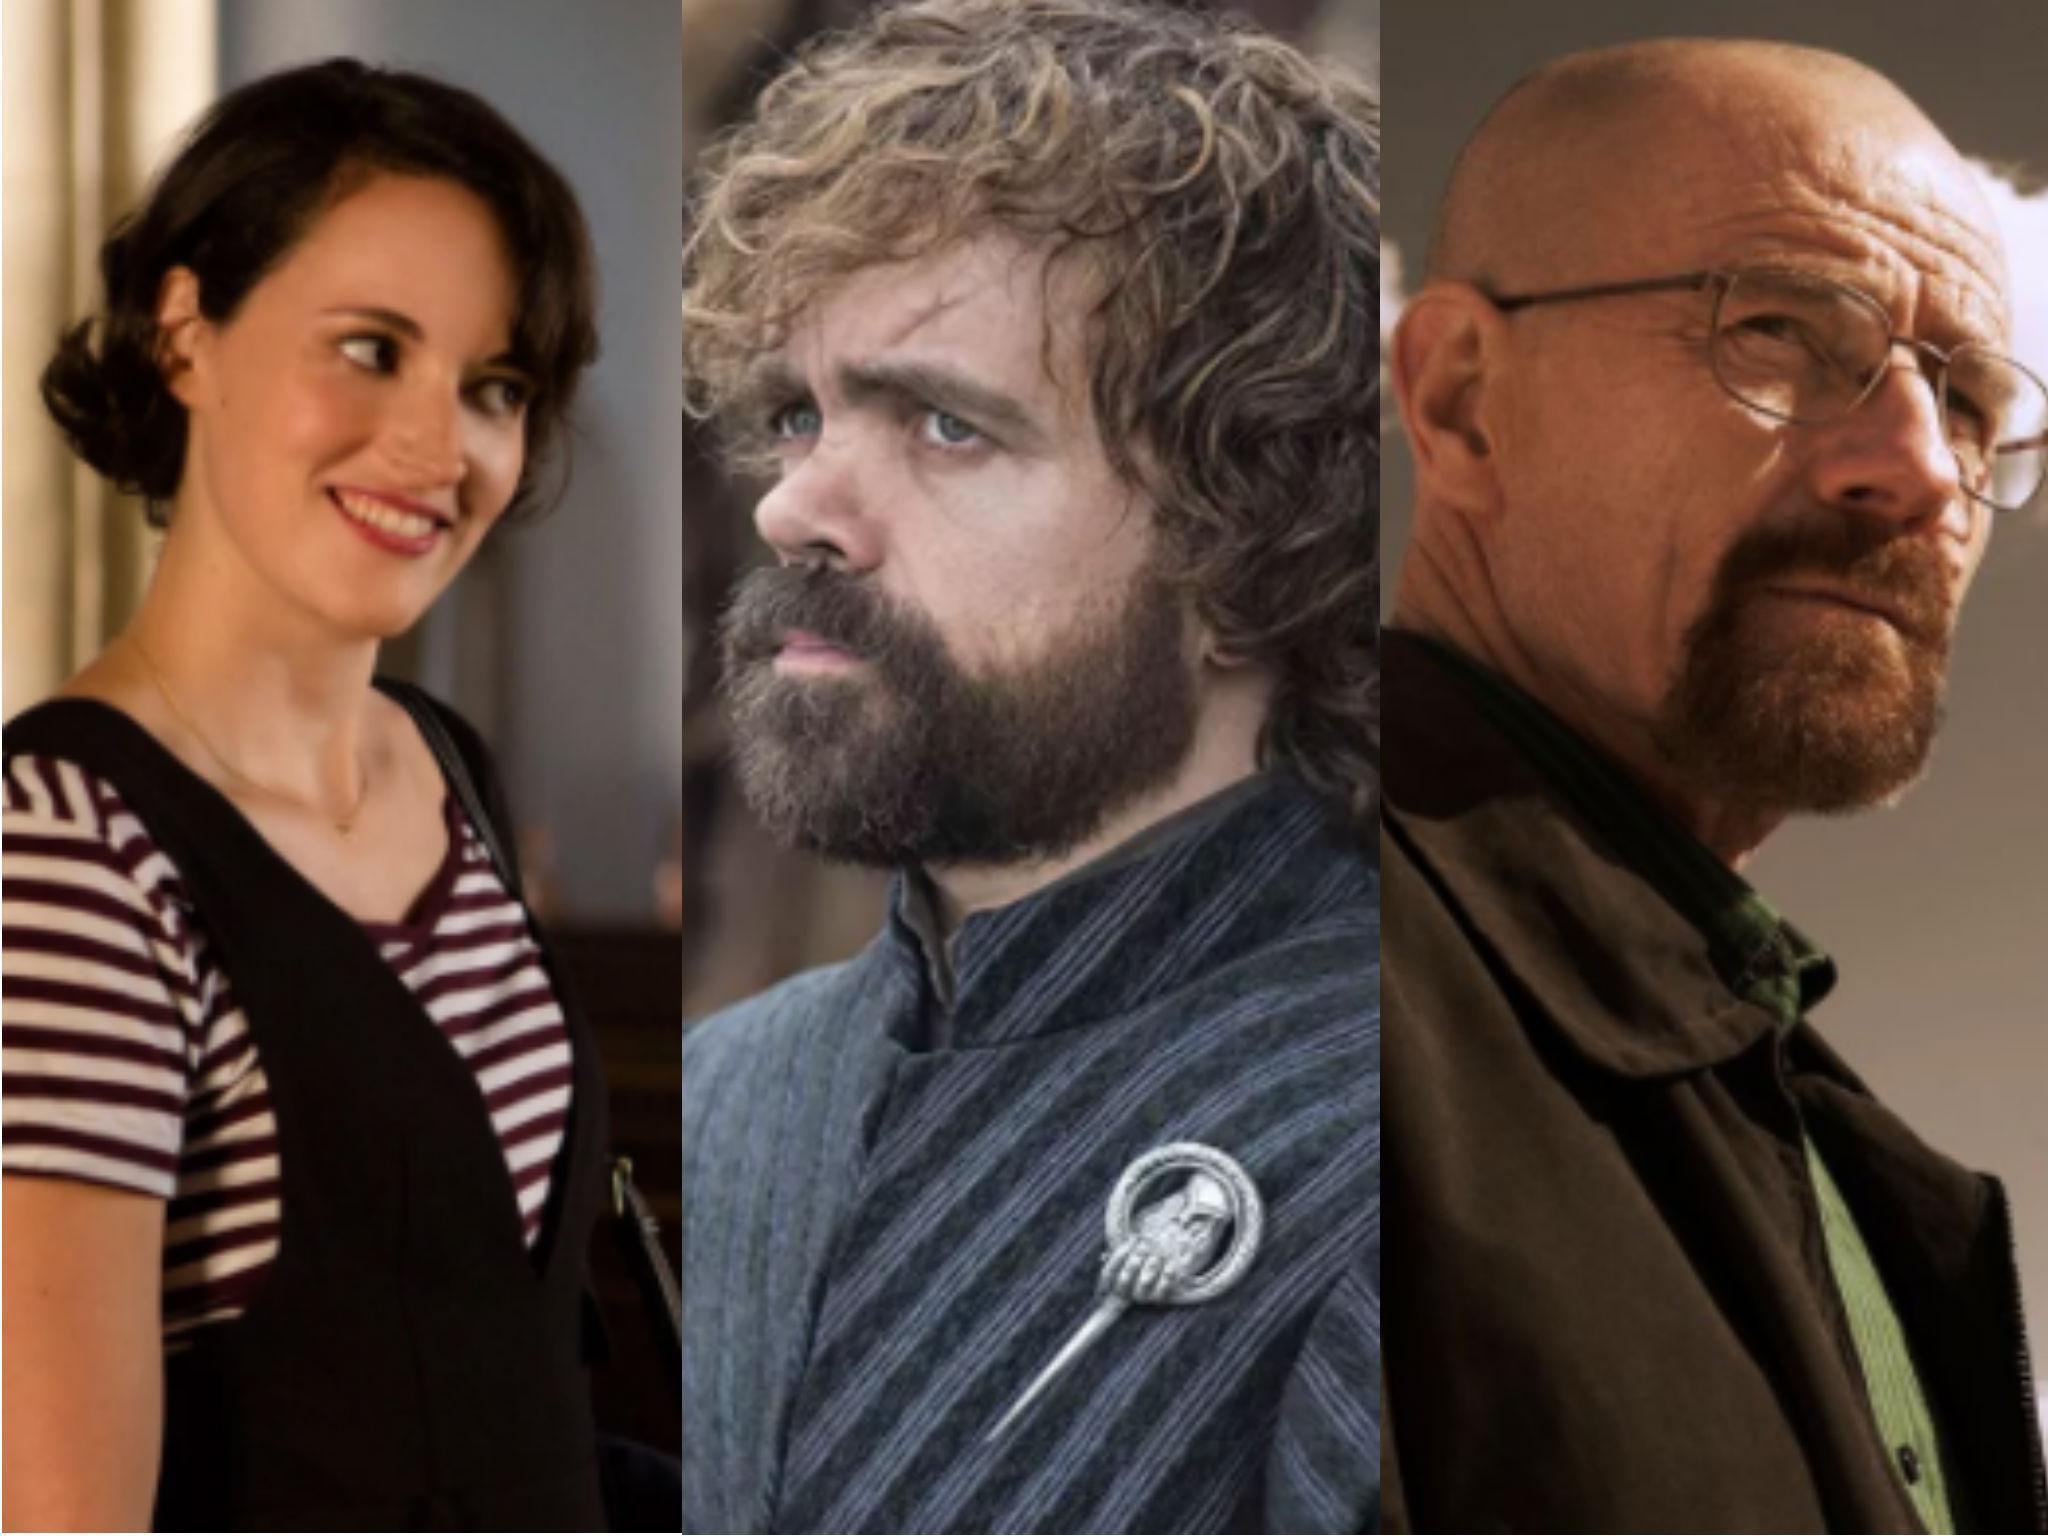 The finales of Fleabag, Game of Thrones and Breaking Bad were all met with varying responses from viewers